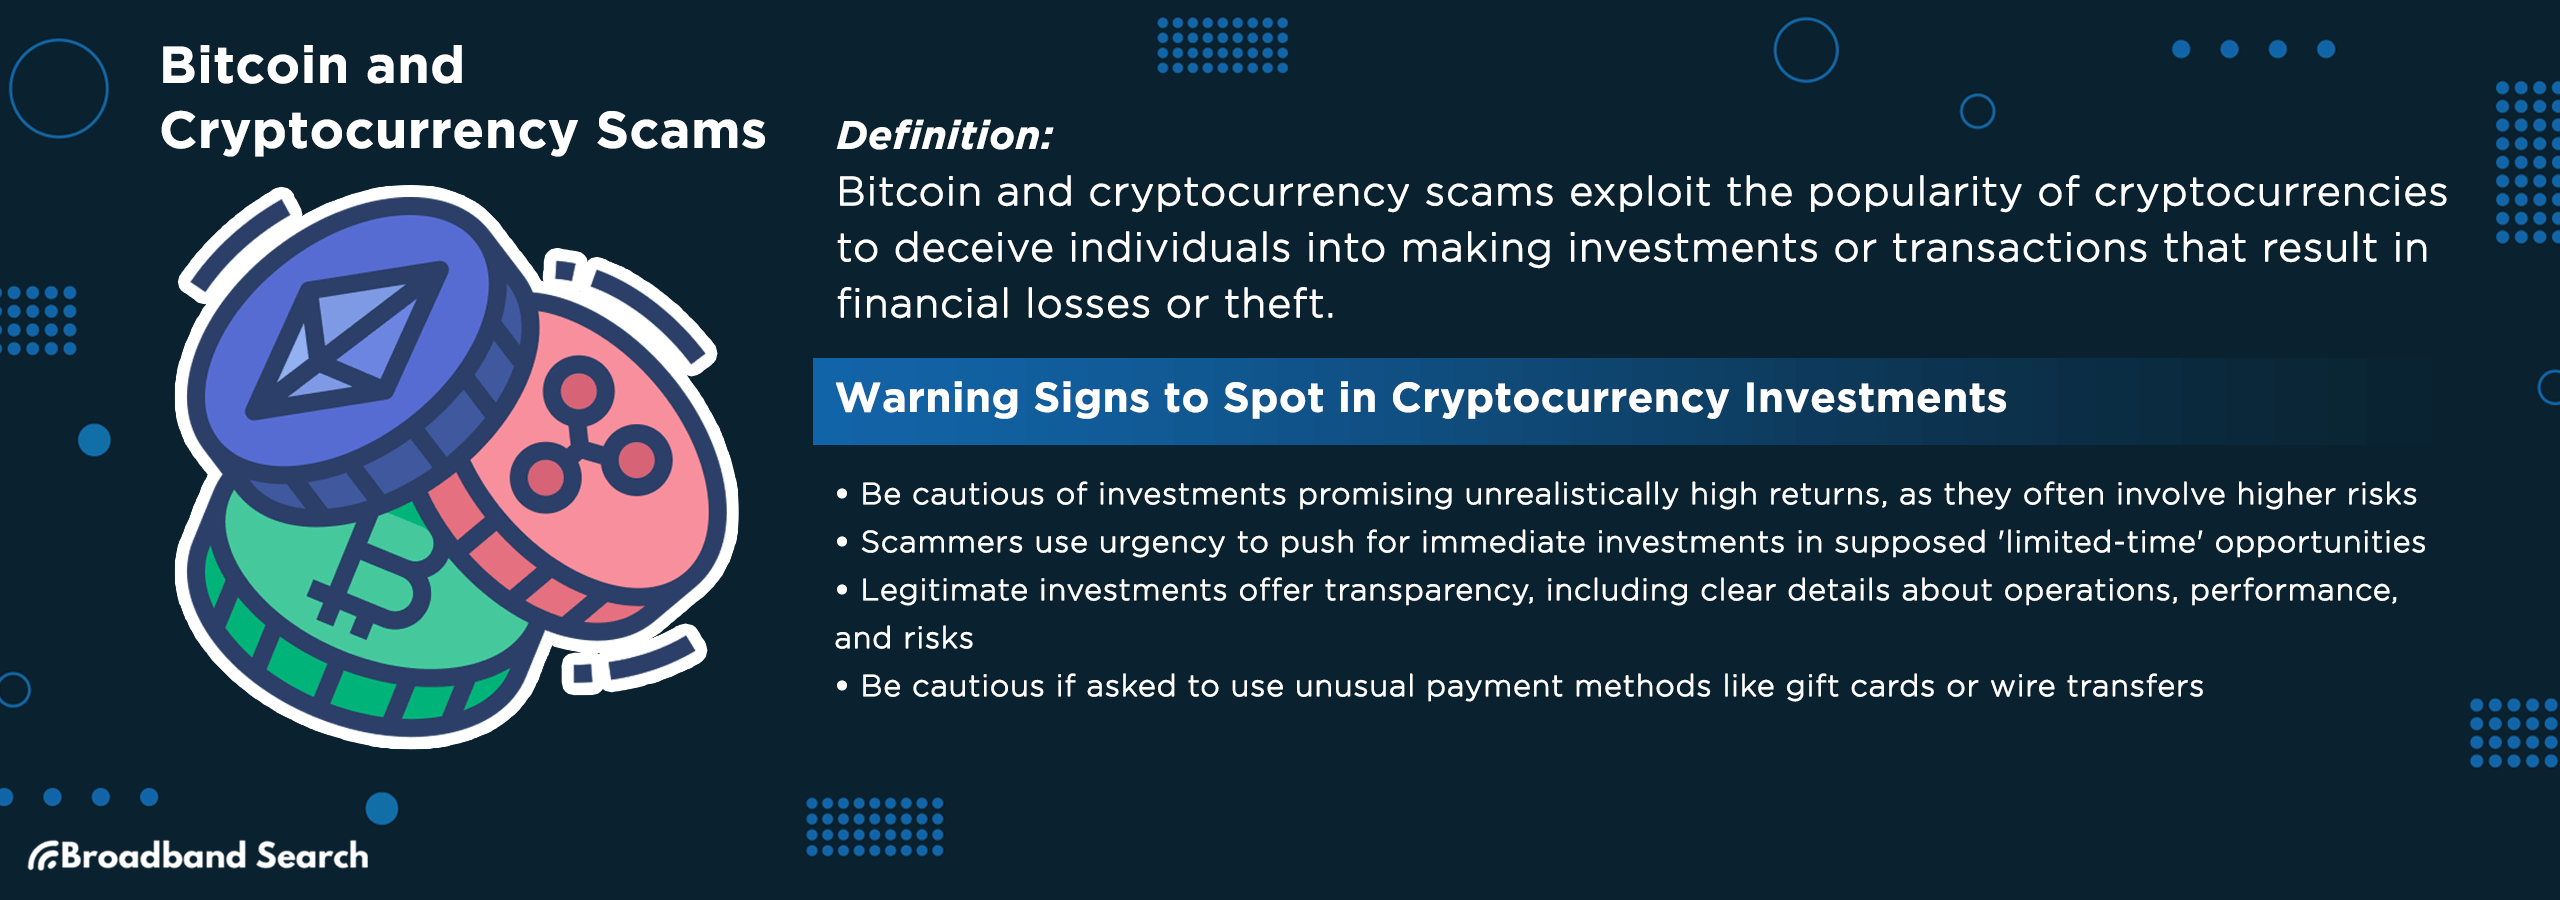 Definition and signs of bitcoin and cryptocurrency scams